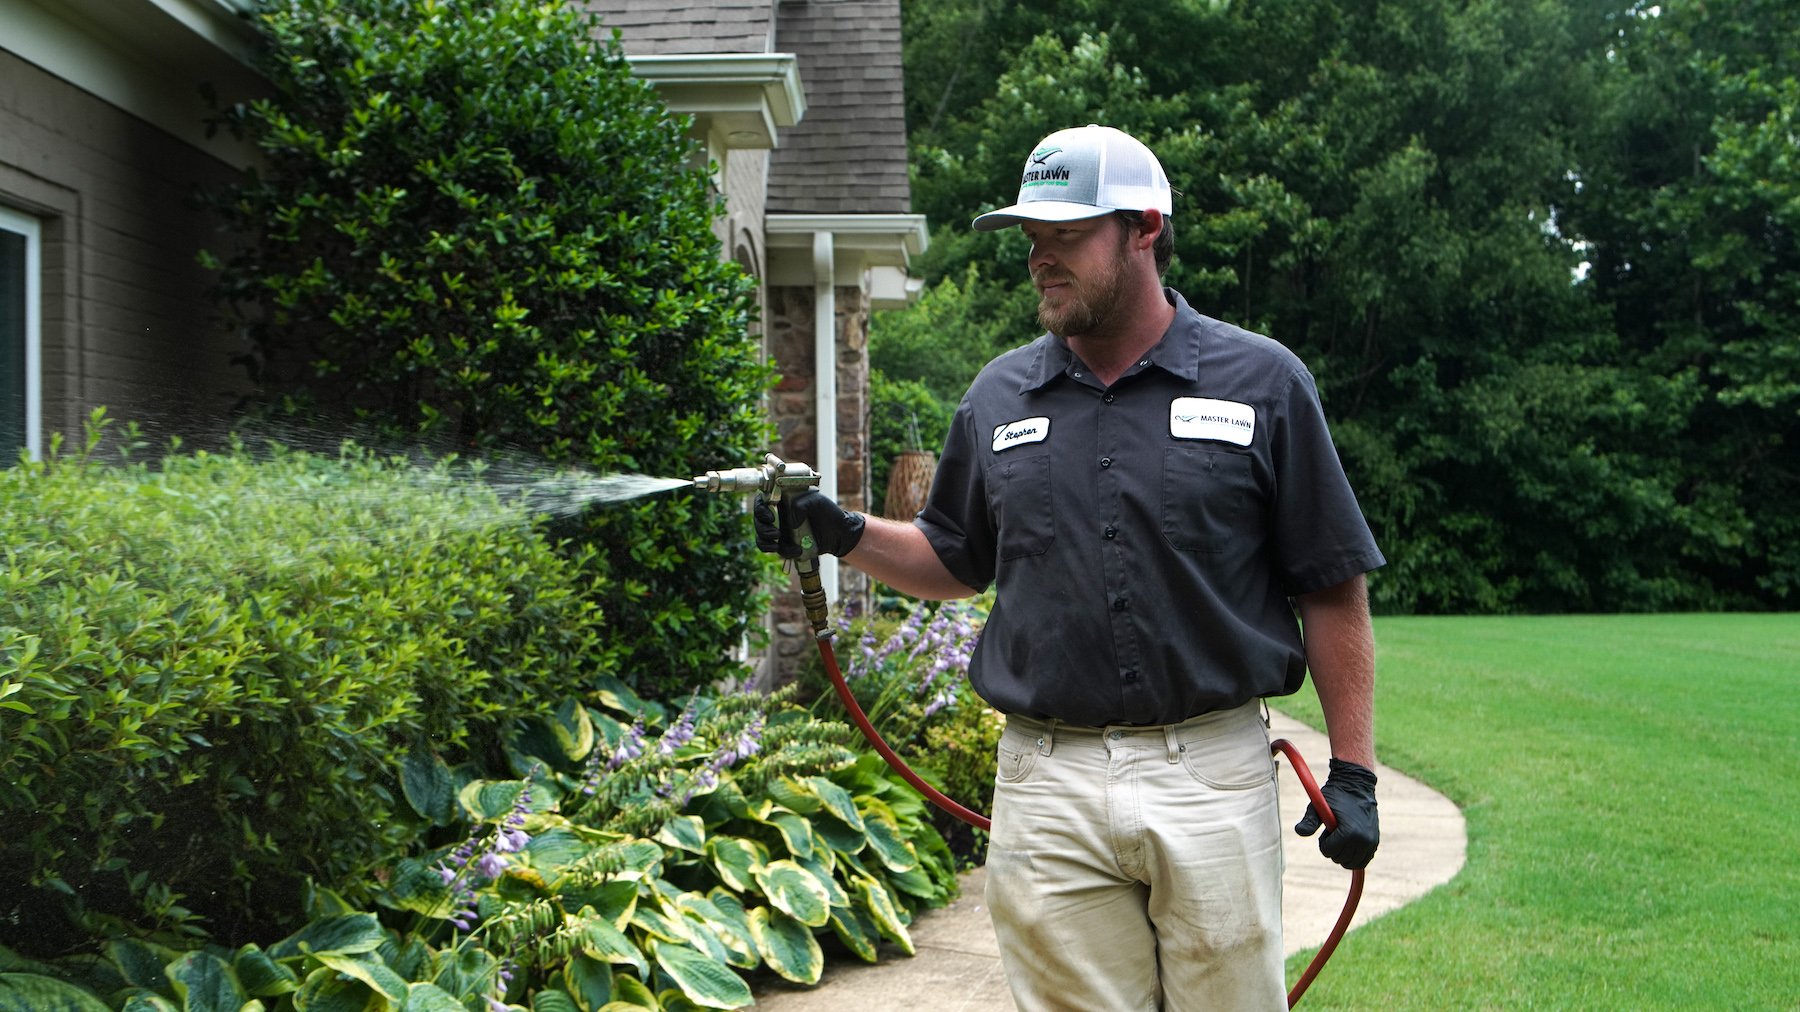 Plant health care technician taking care of shrubs and trees